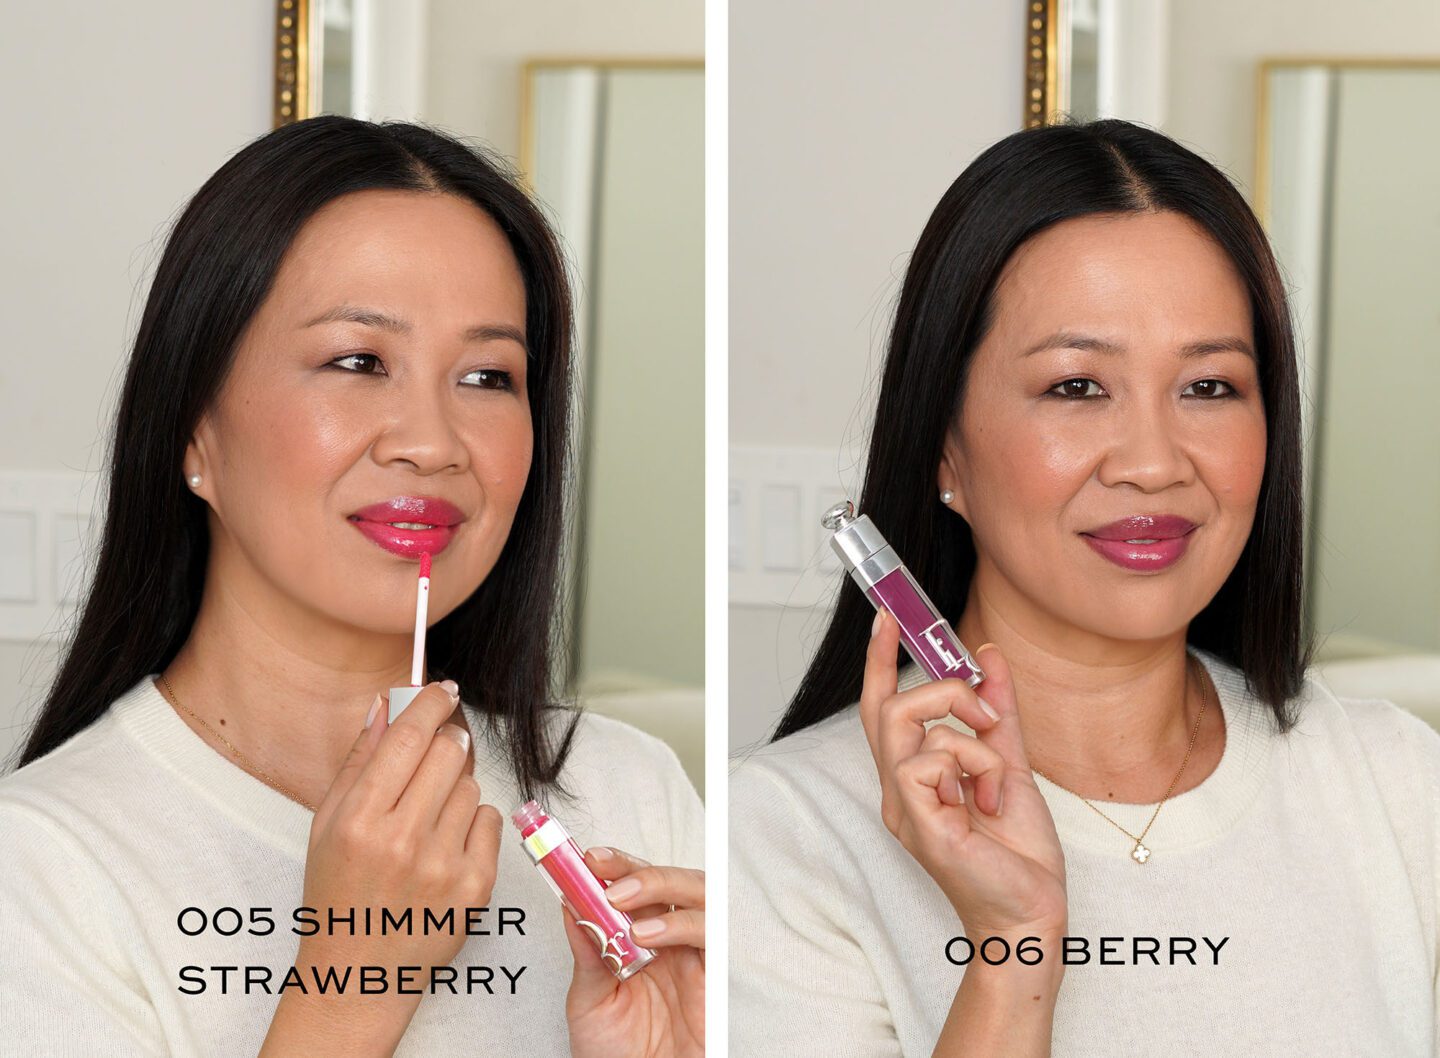 Dior Lip Maximizer in 005 Shimmer Strawberry and 006 Berry